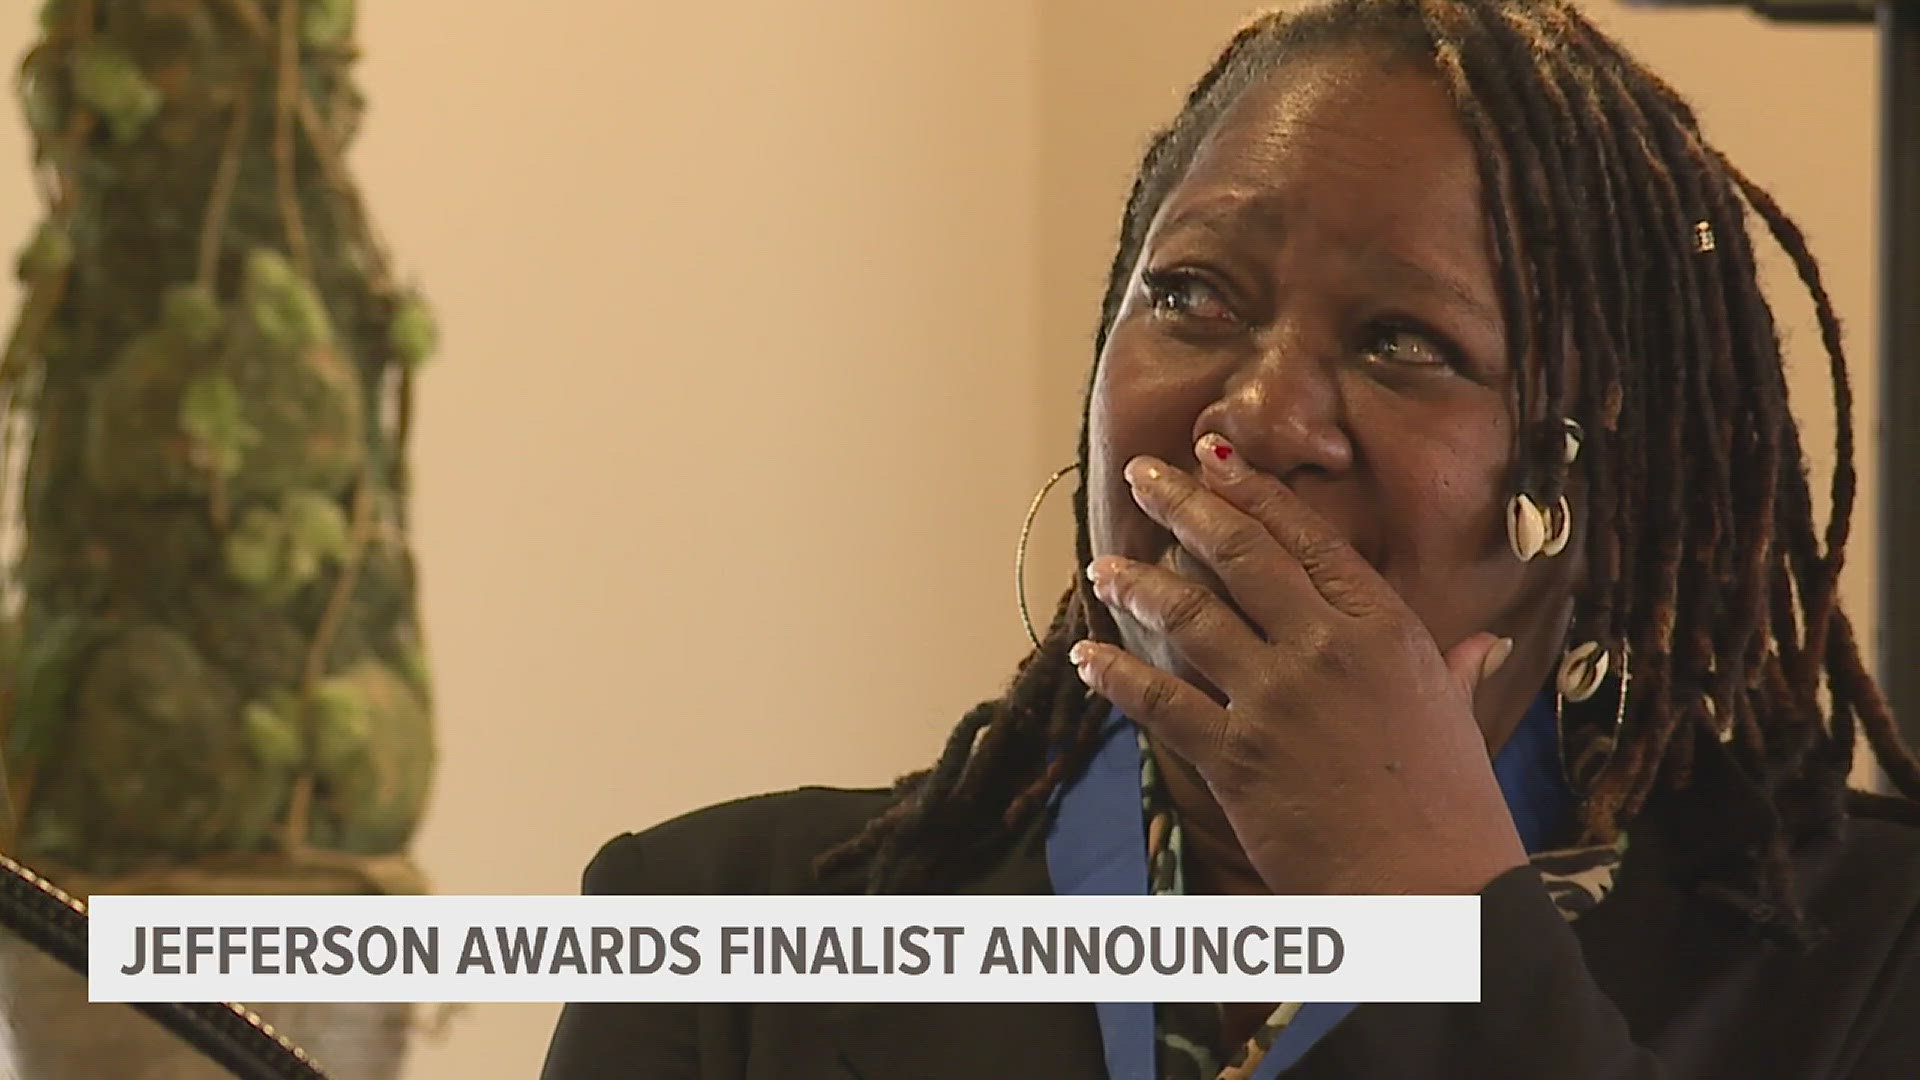 Luekinna Hodges' organization "Kinna's House of Love" has supported Quad Citizens in need for years. WQAD is proud to have her as our finalist.